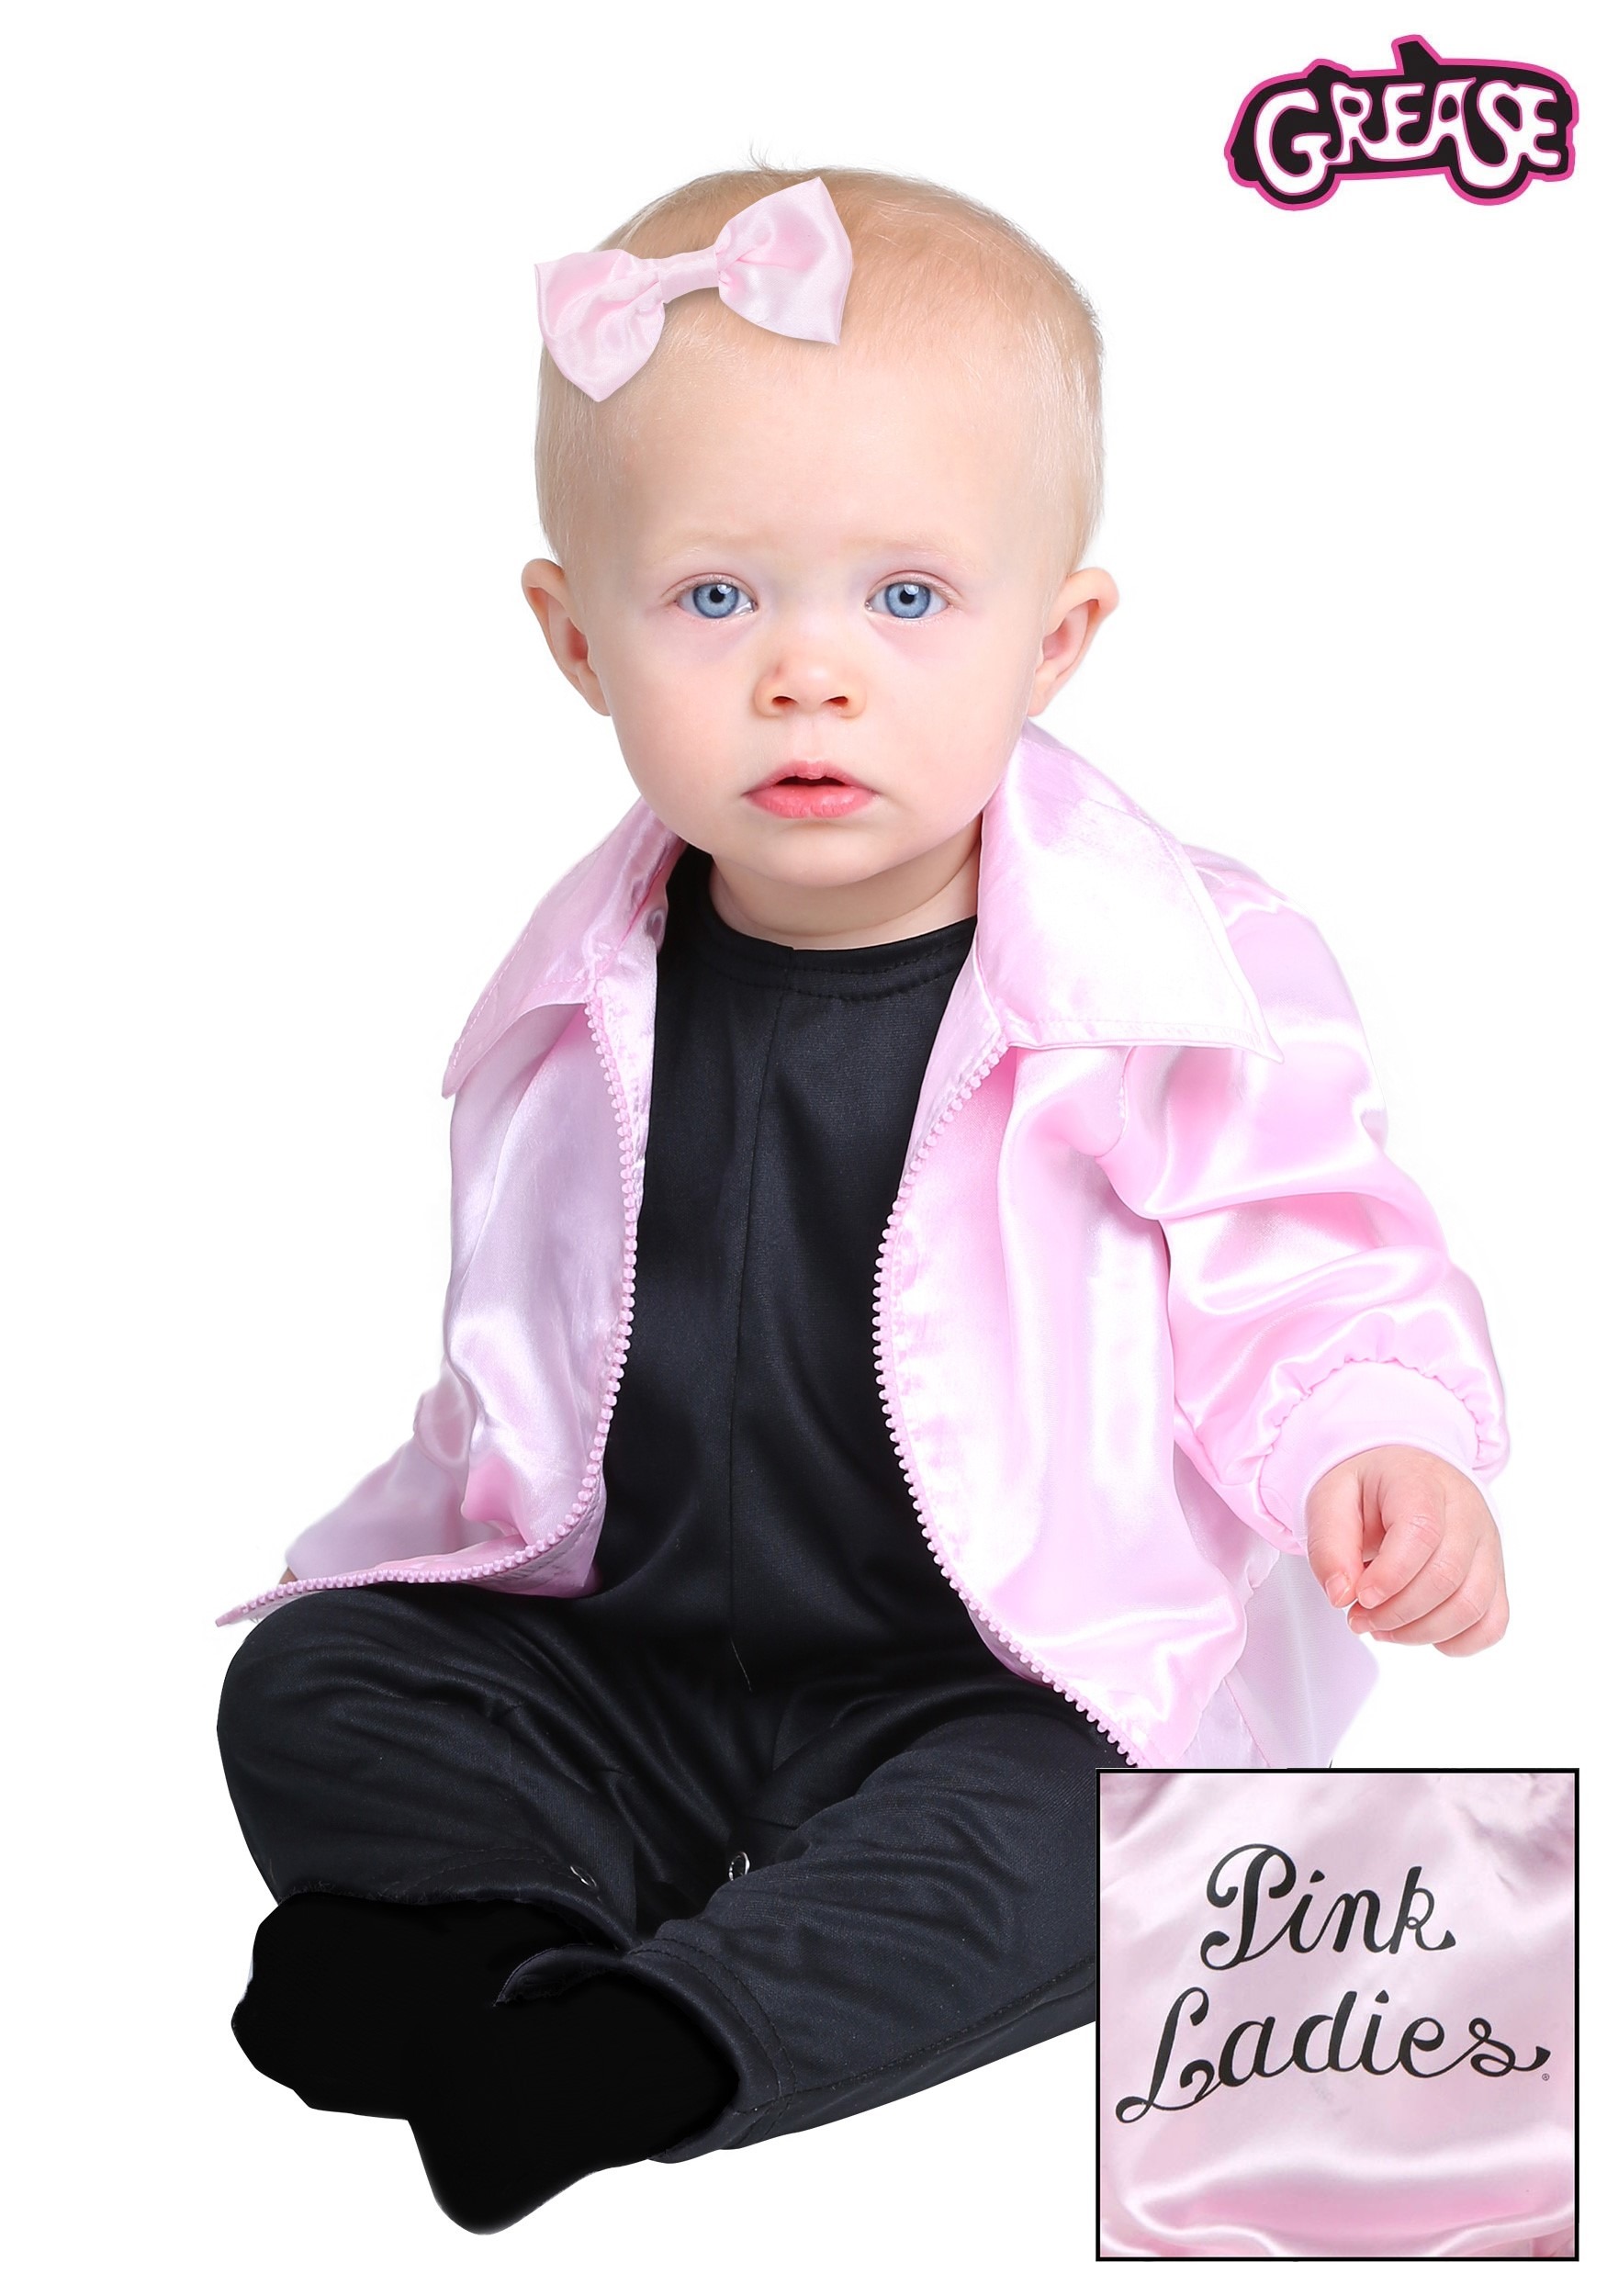 Grease Pink Ladies Costume For Babies